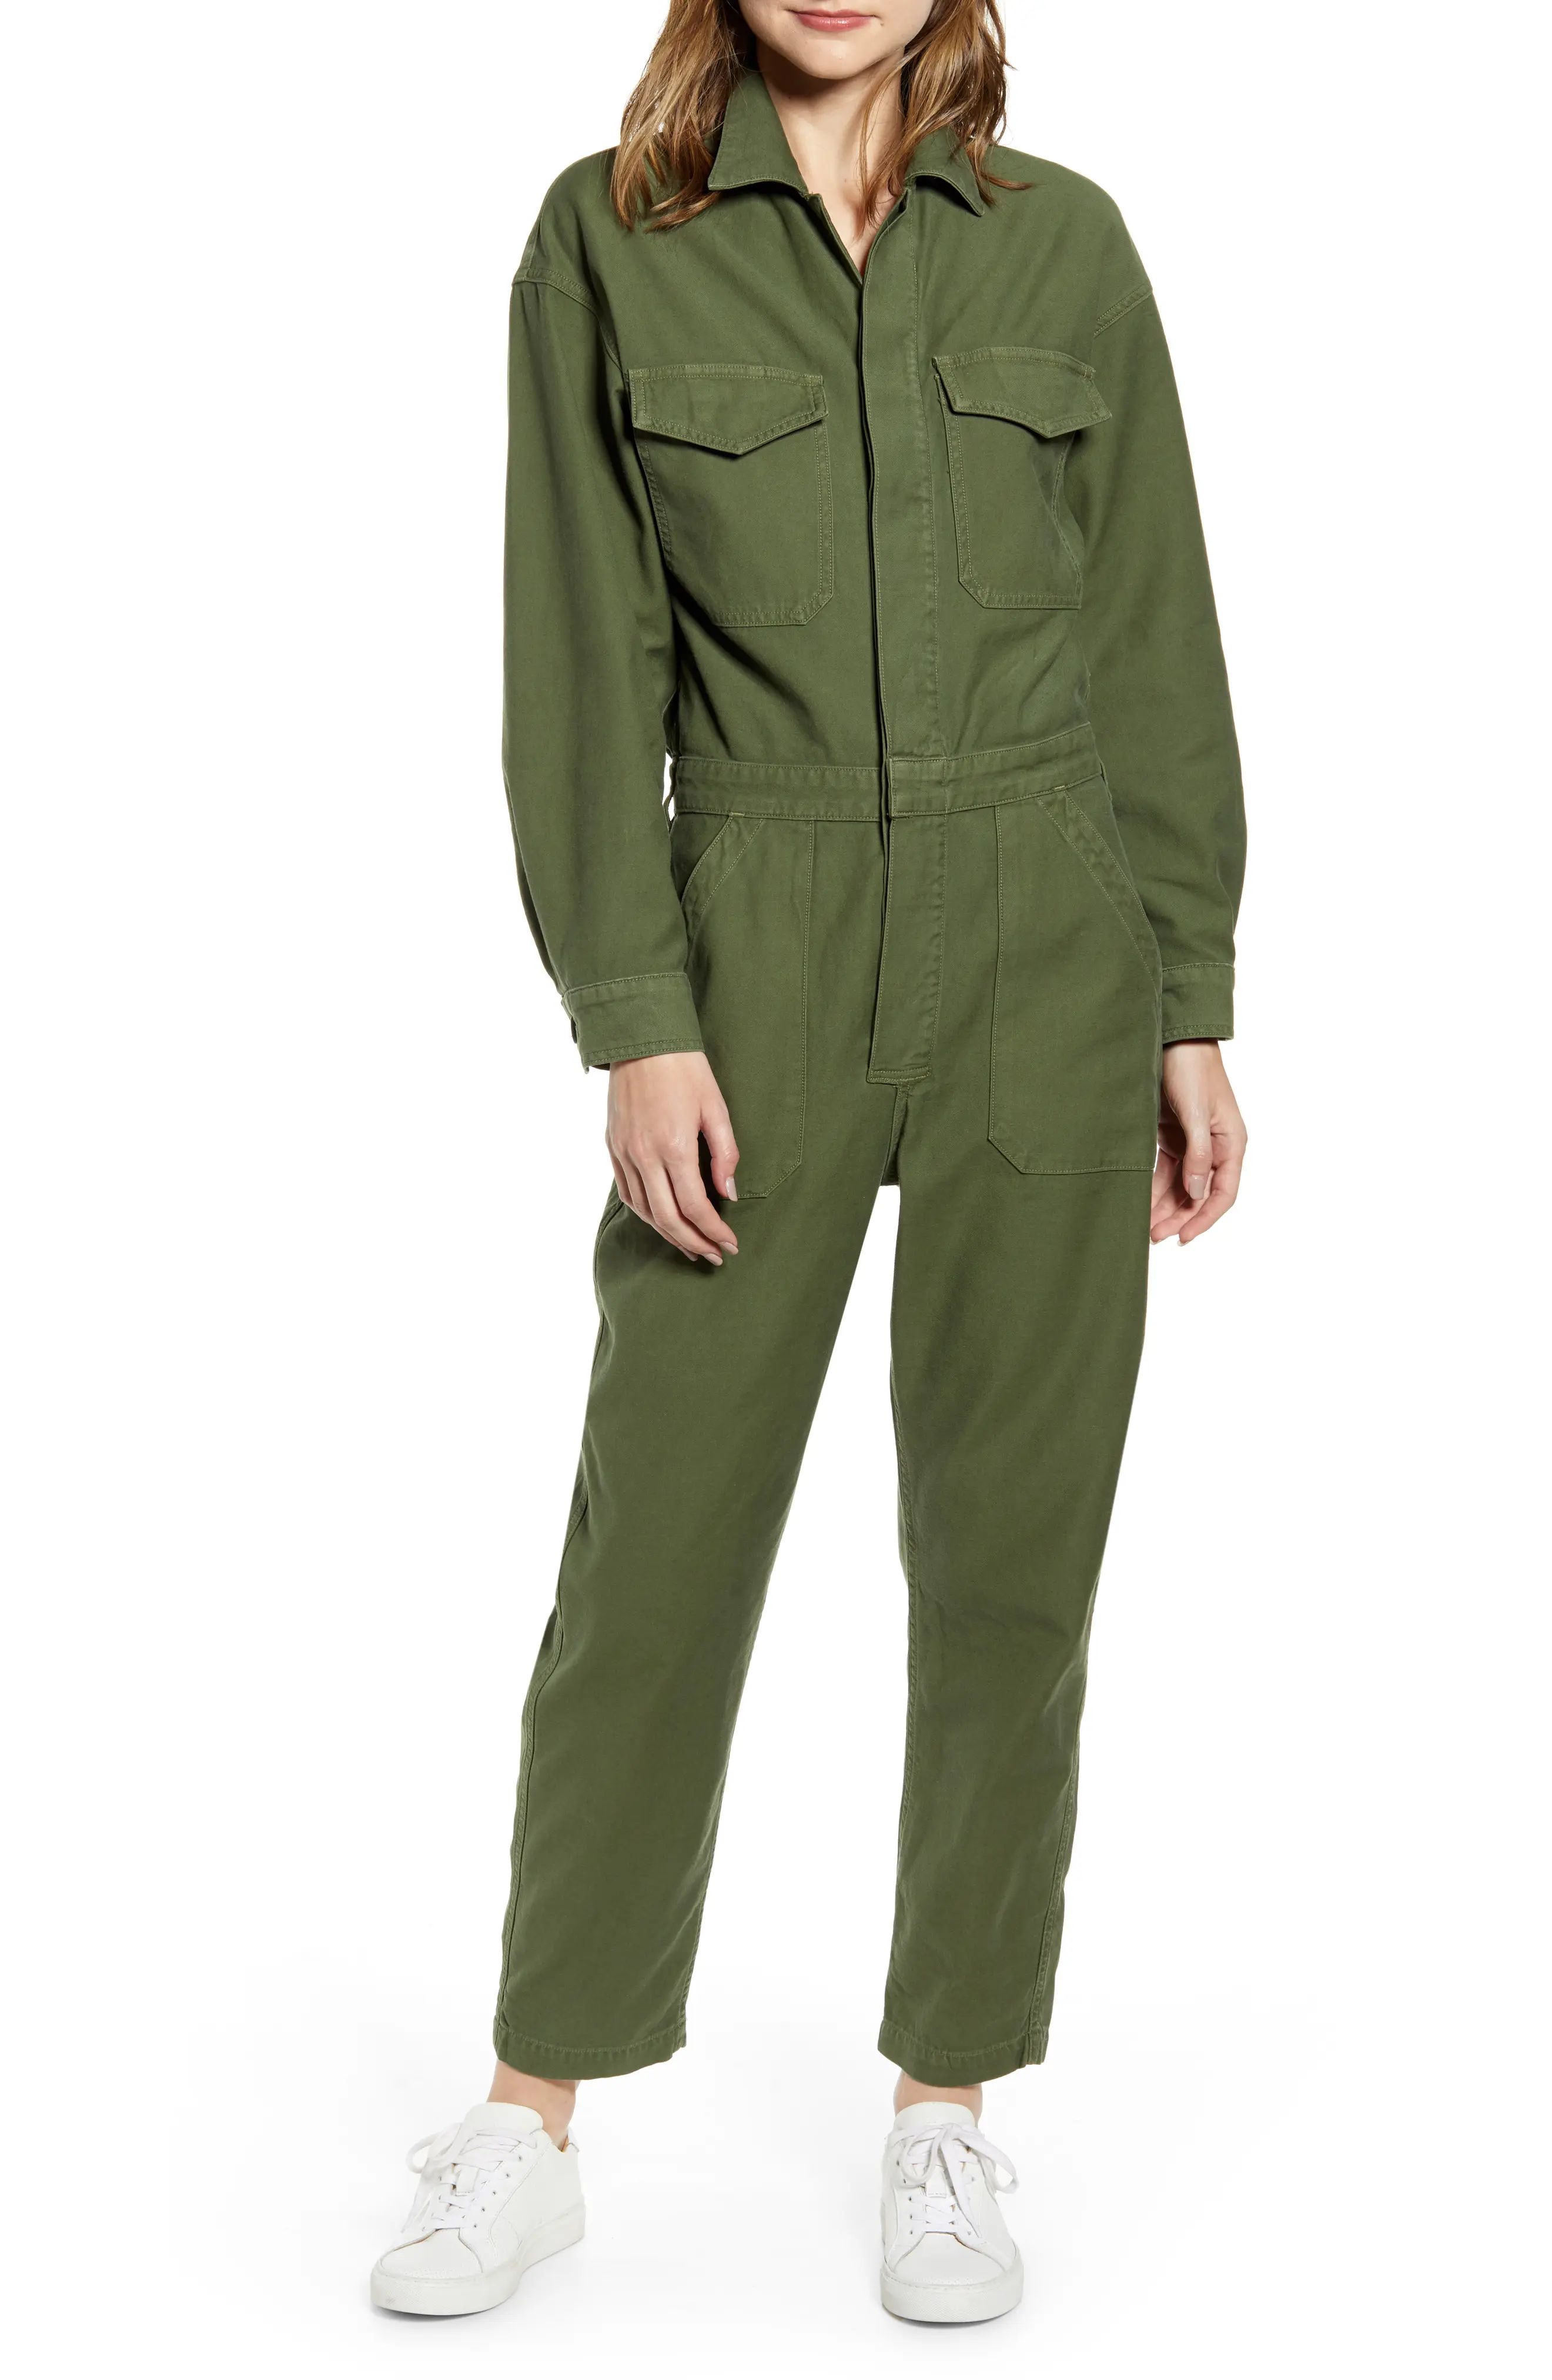 Women's Citizens Of Humanity Marta Long Sleeve Cotton Twill Utility Jumpsuit, Size Large - Green | Nordstrom